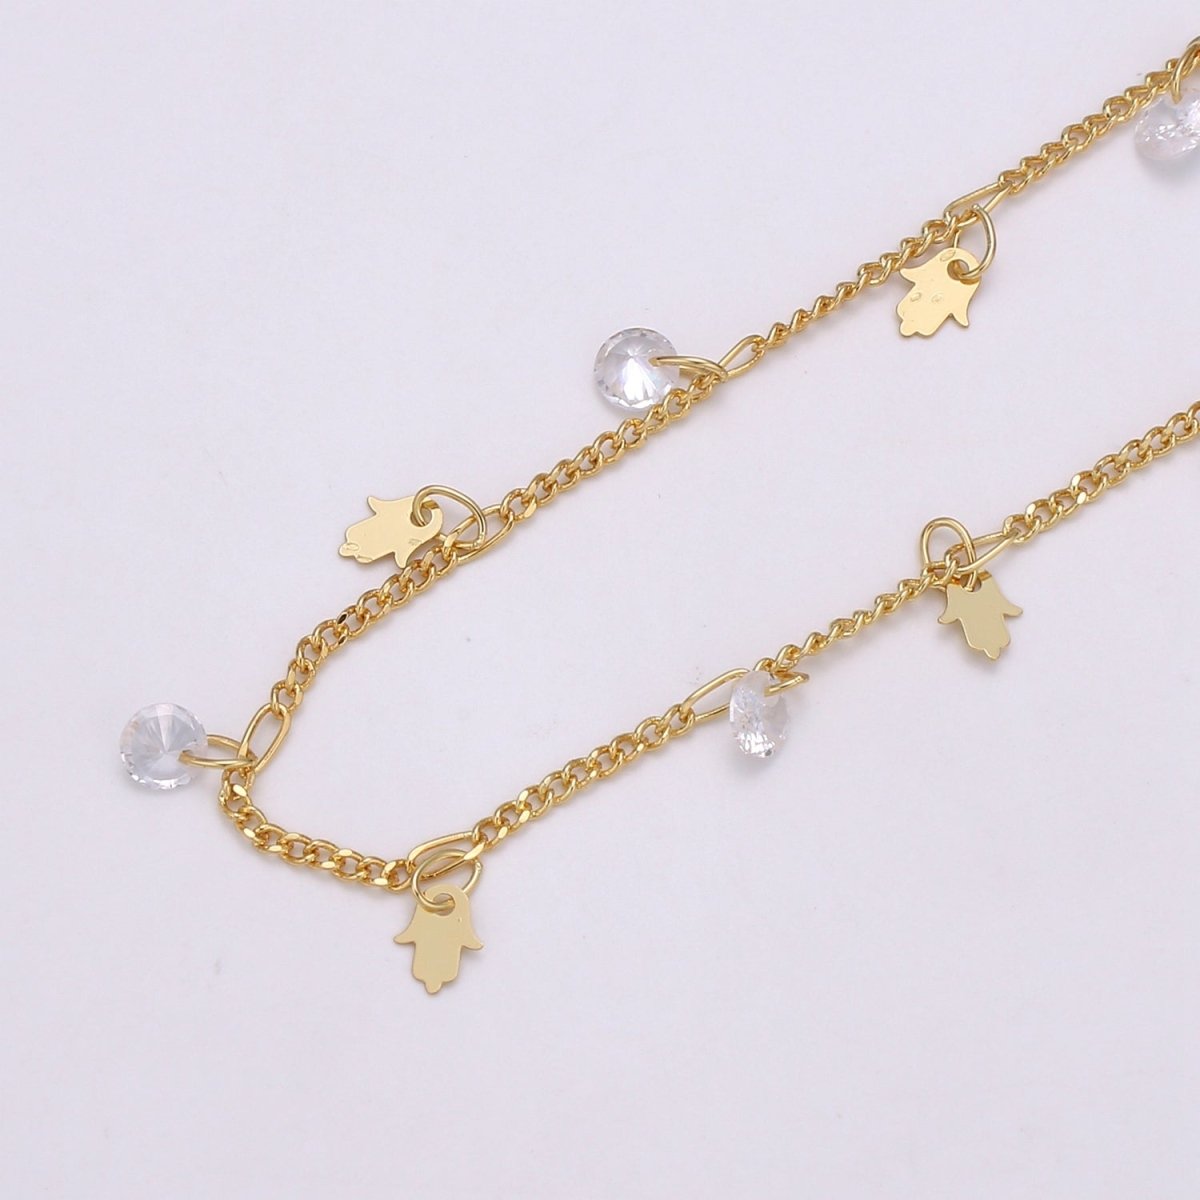 24K Gold Filled Curb Chain By Yard, Hamesh CZ Hamsa Hand Charm Linked Chain, CURB DESIGNED Unfinished Chain For Necklace Bracelet Anklet Component Supply | ROLL-363 Clearance Pricing - DLUXCA